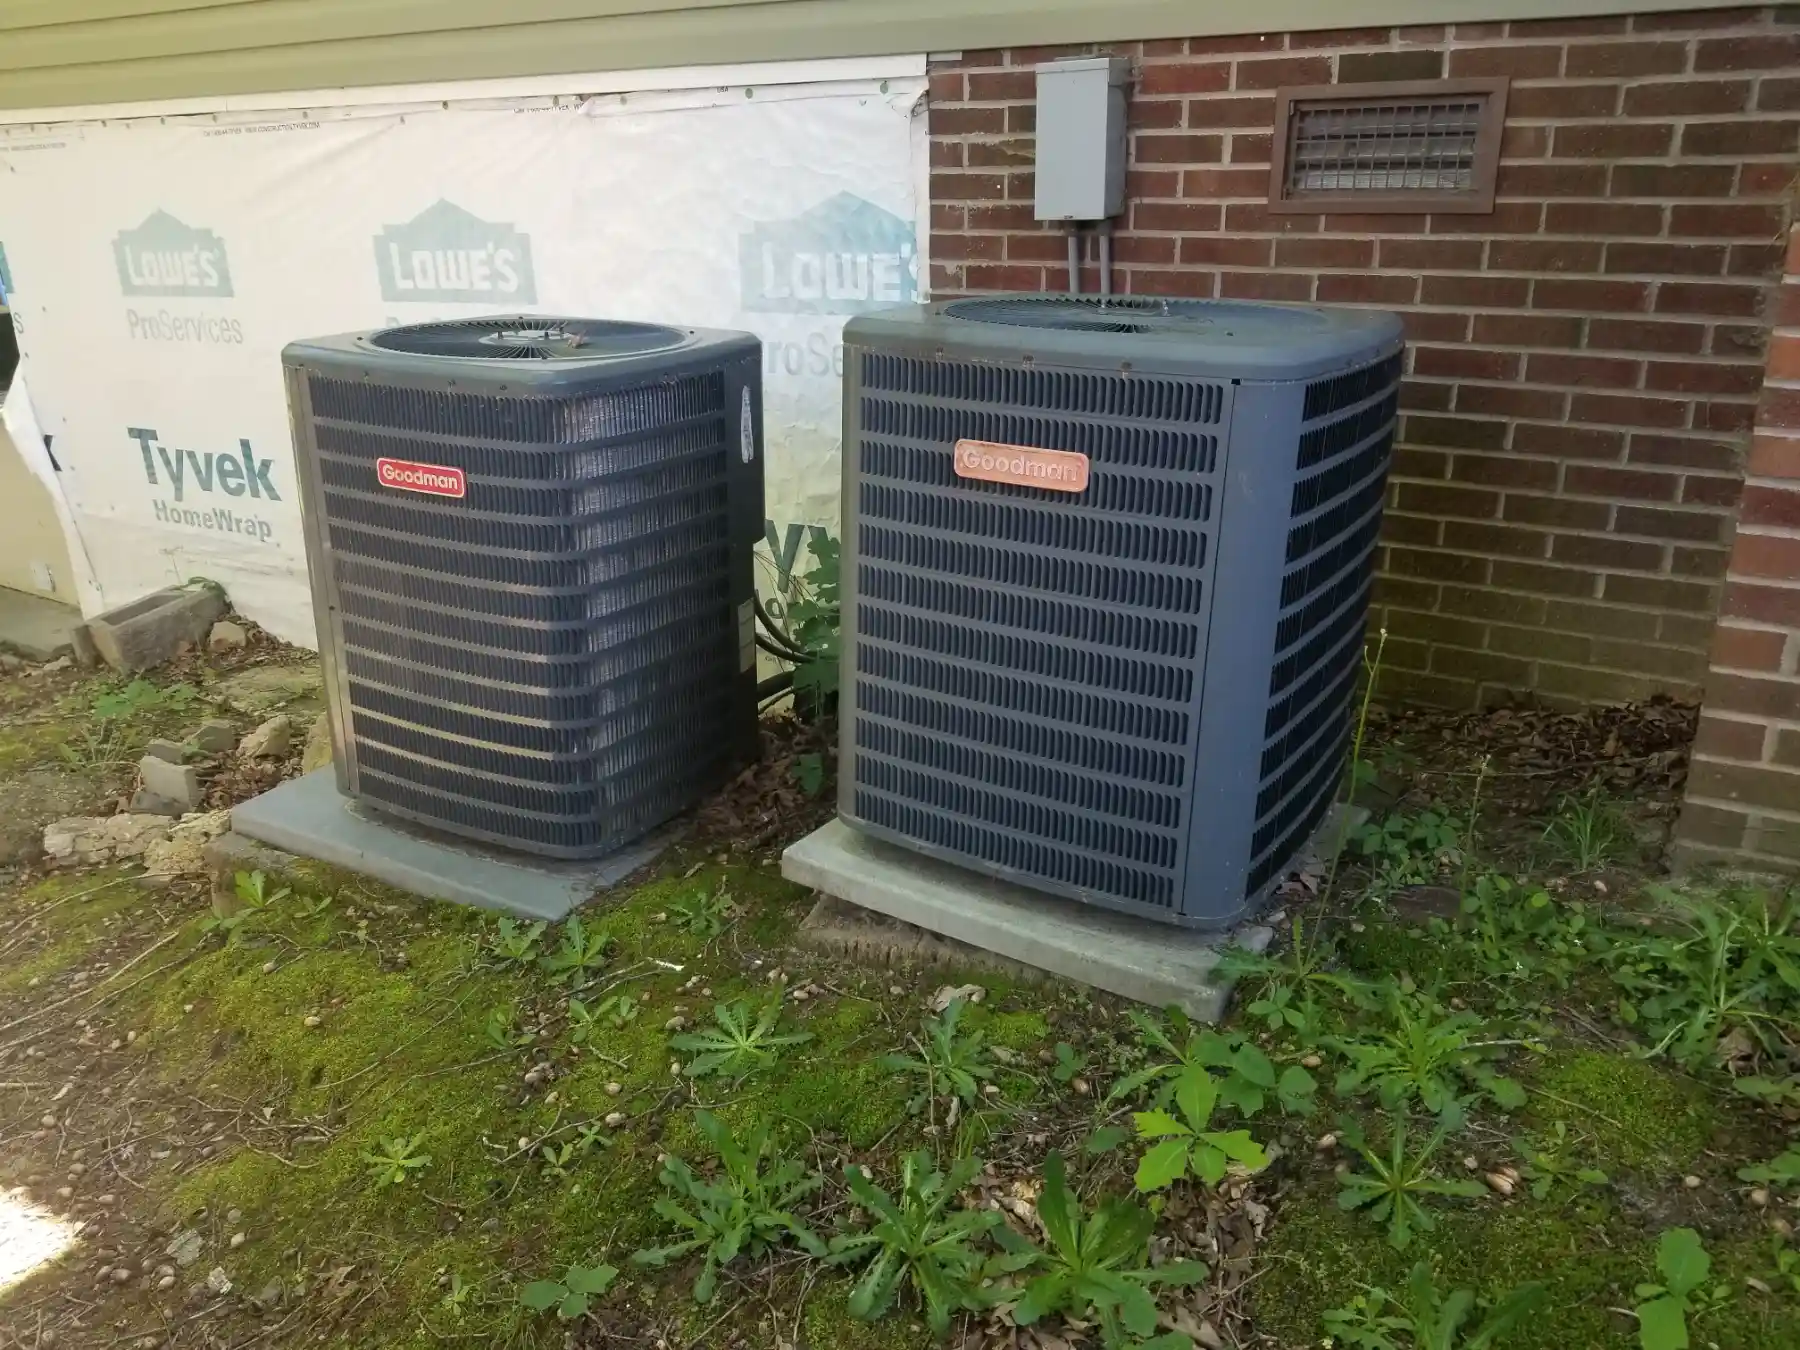 Right side view of Air conditioner units for an AC repair job in Euless, TX.